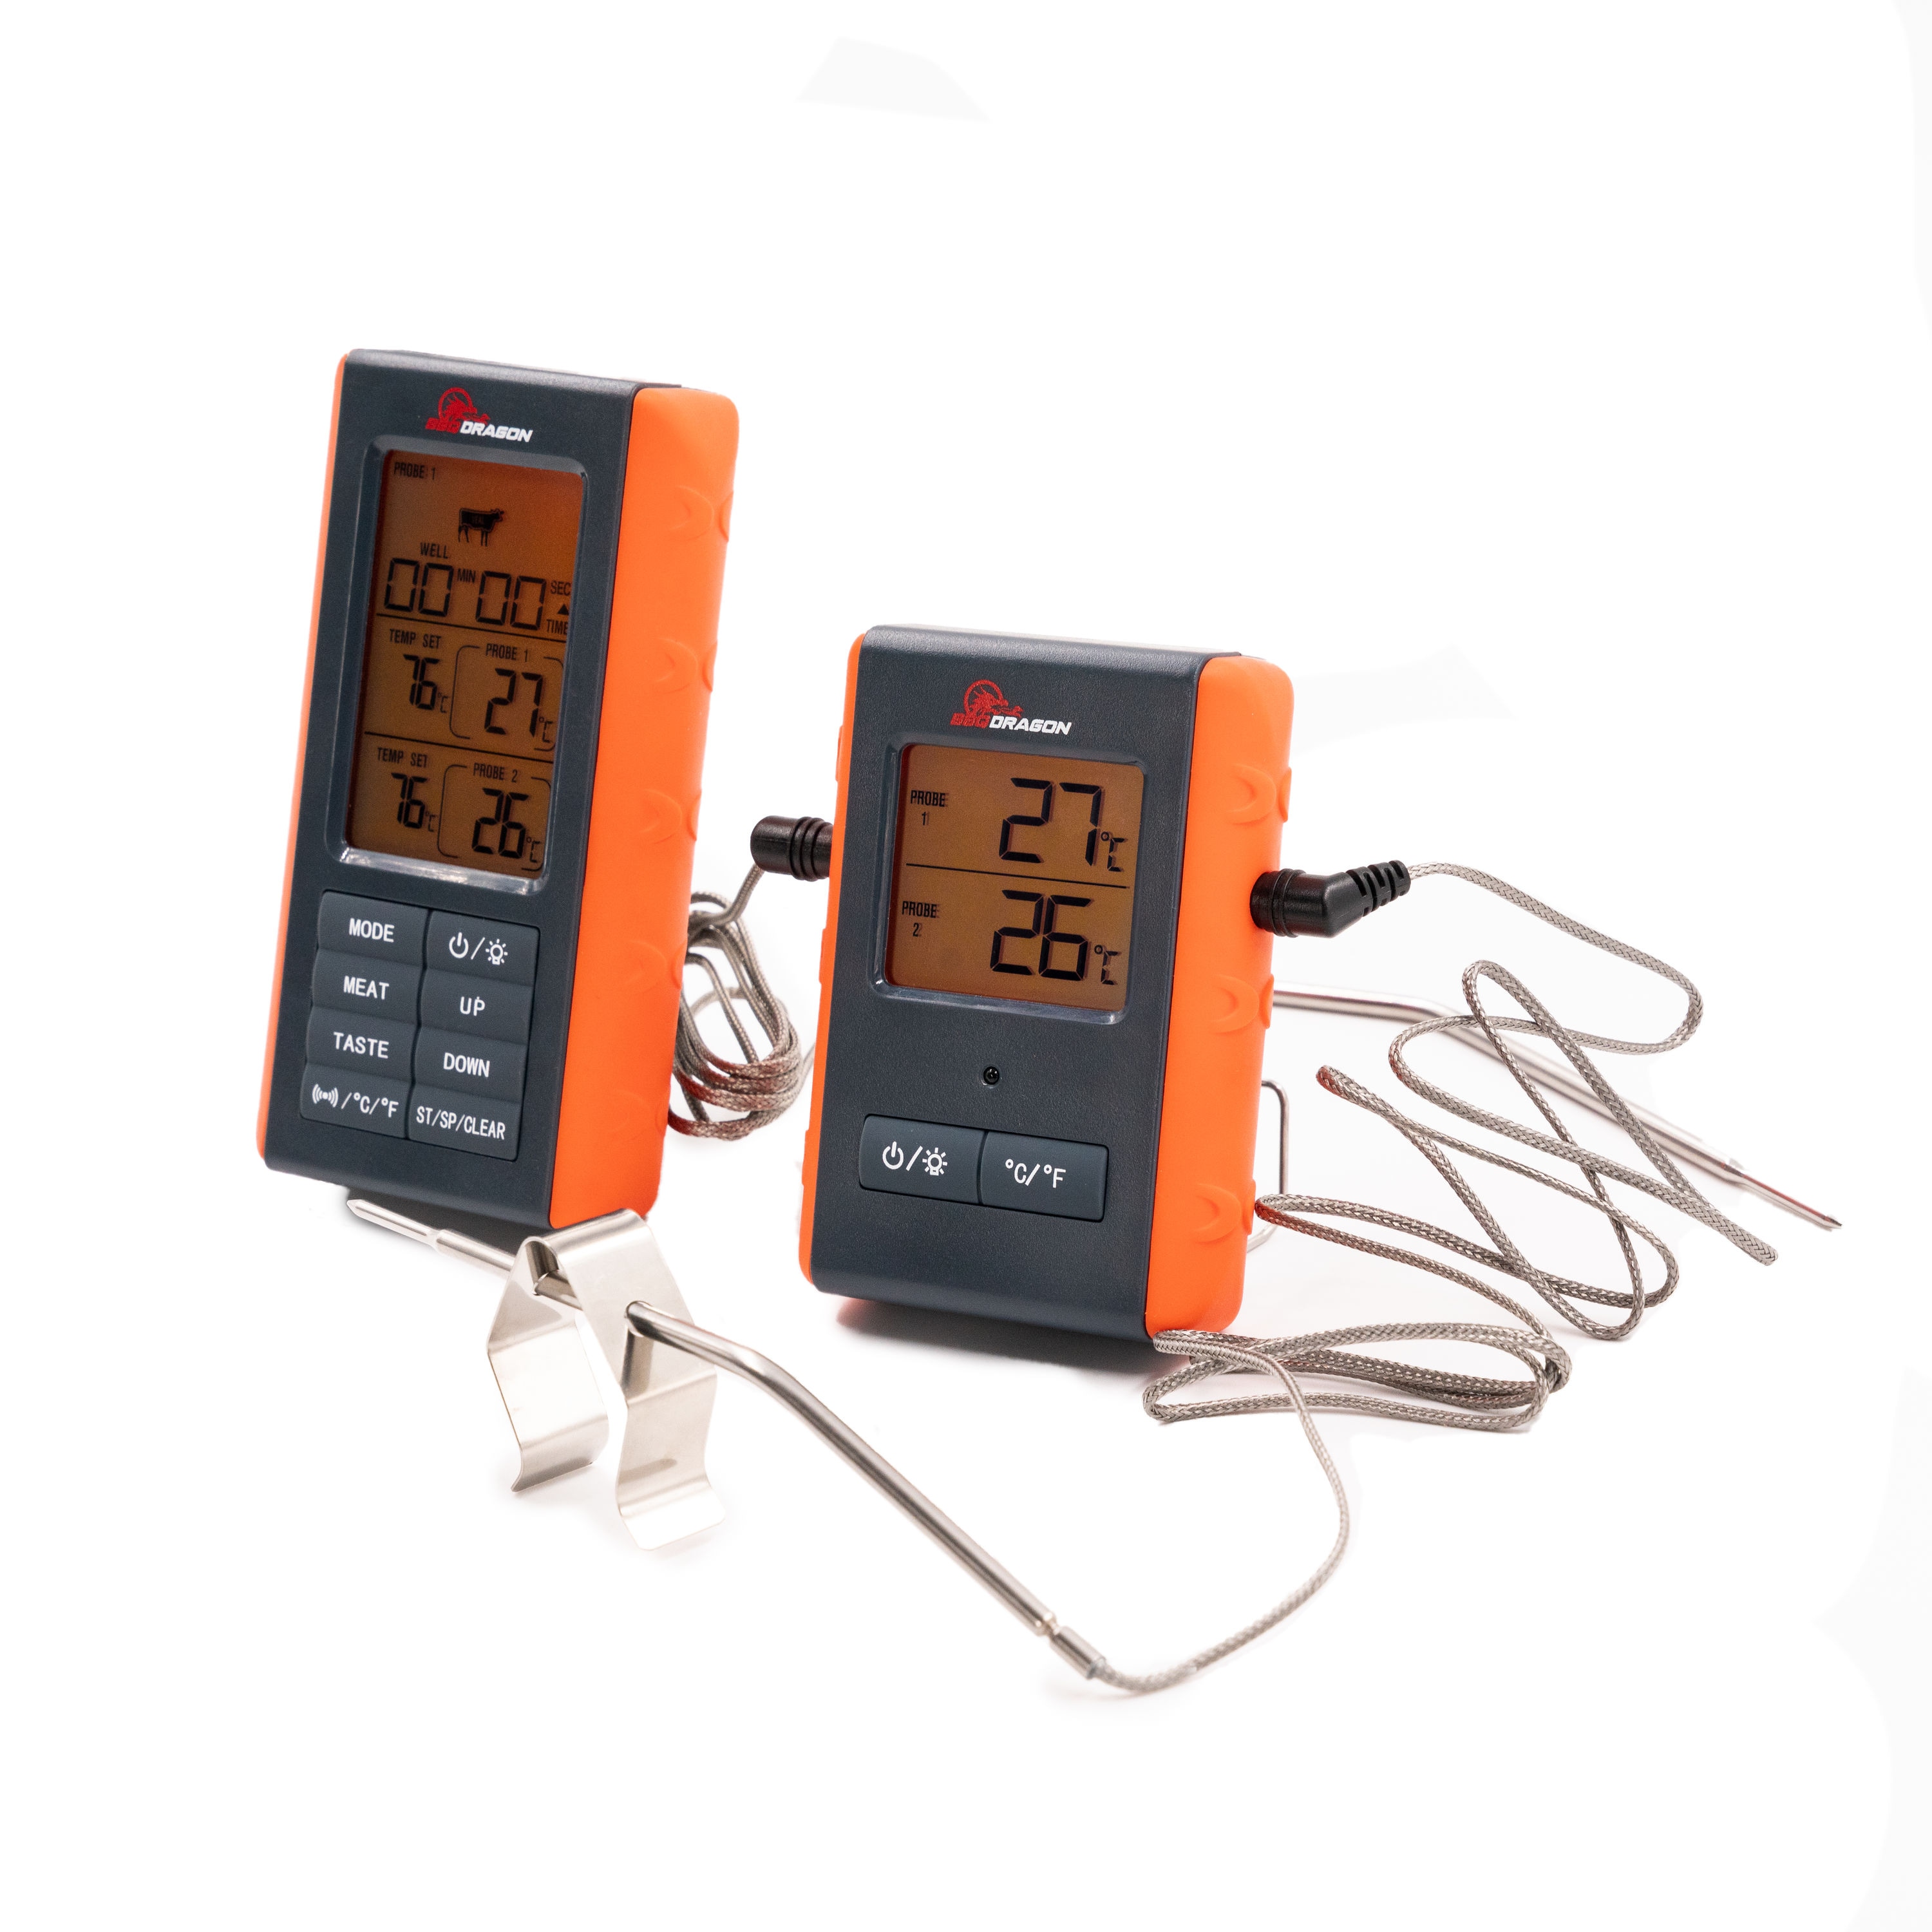 Mr. Bar-B-Q Remote Digital Meat Temperature Gauge with Stainless